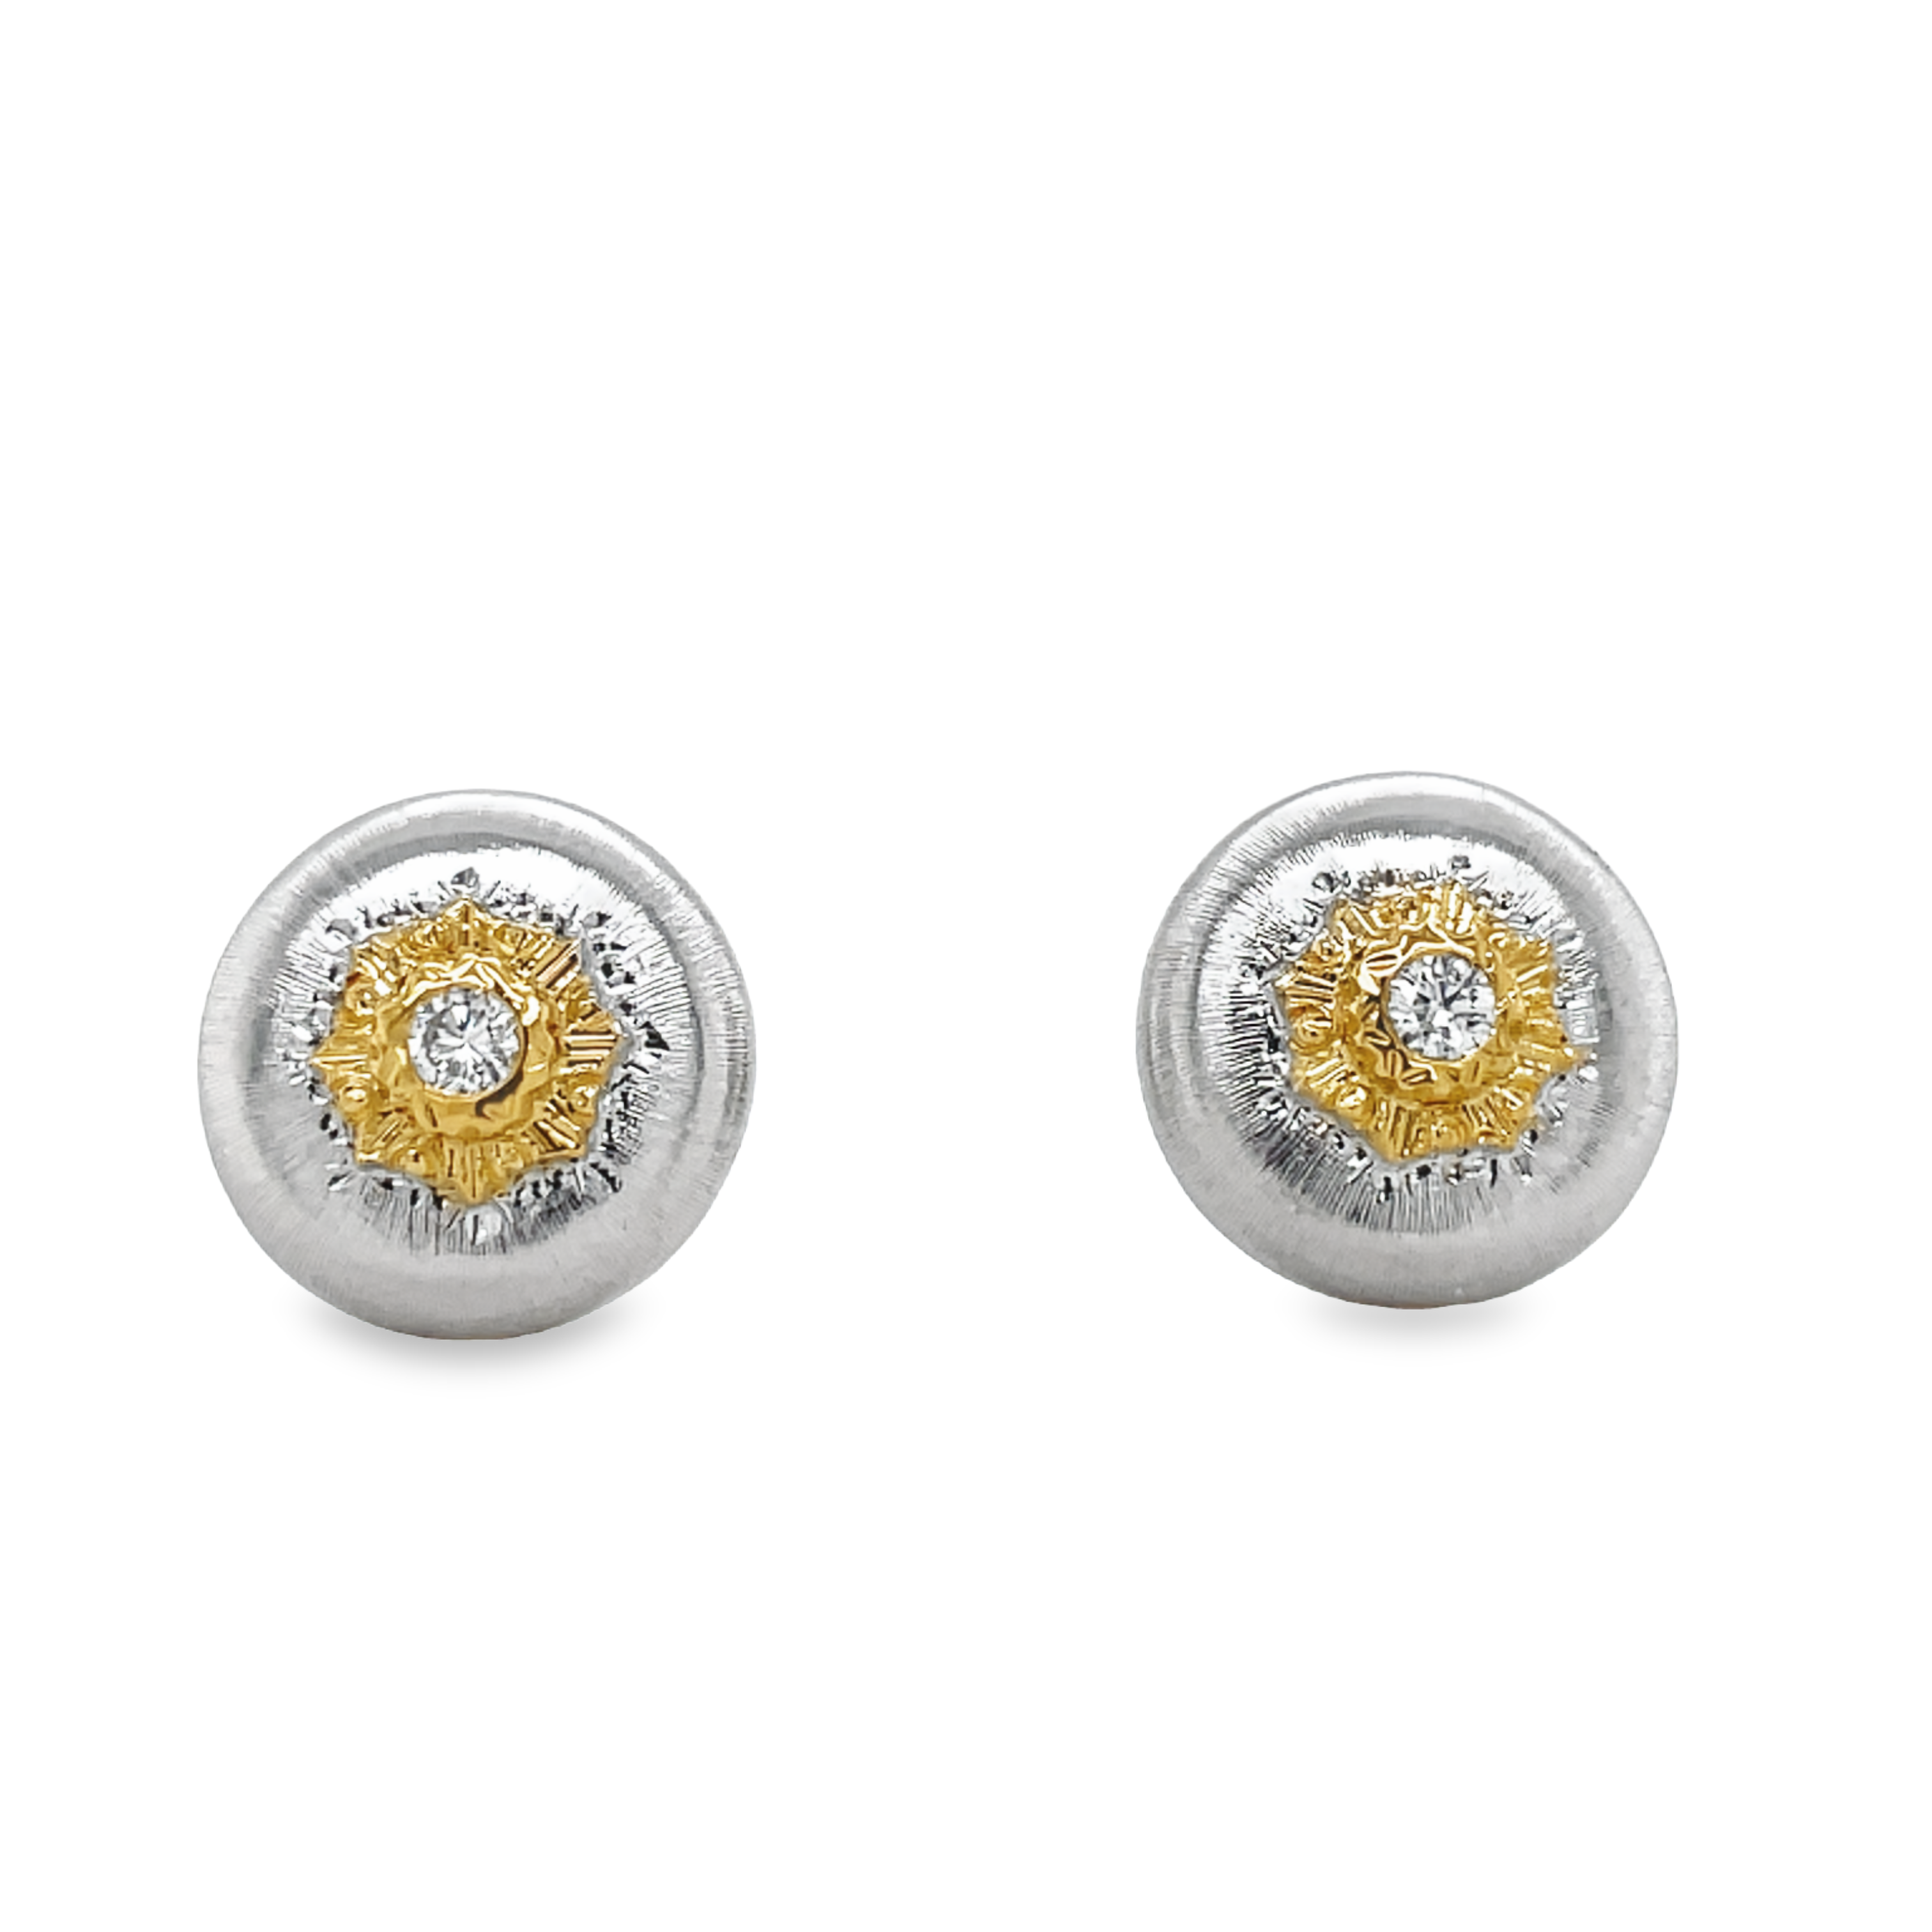 18k white & yellow gold.  Italian made.  Engraved  12.00 mm wide.  One round diamond 0.10 cts   Brushed finished.  Secure friction backs 